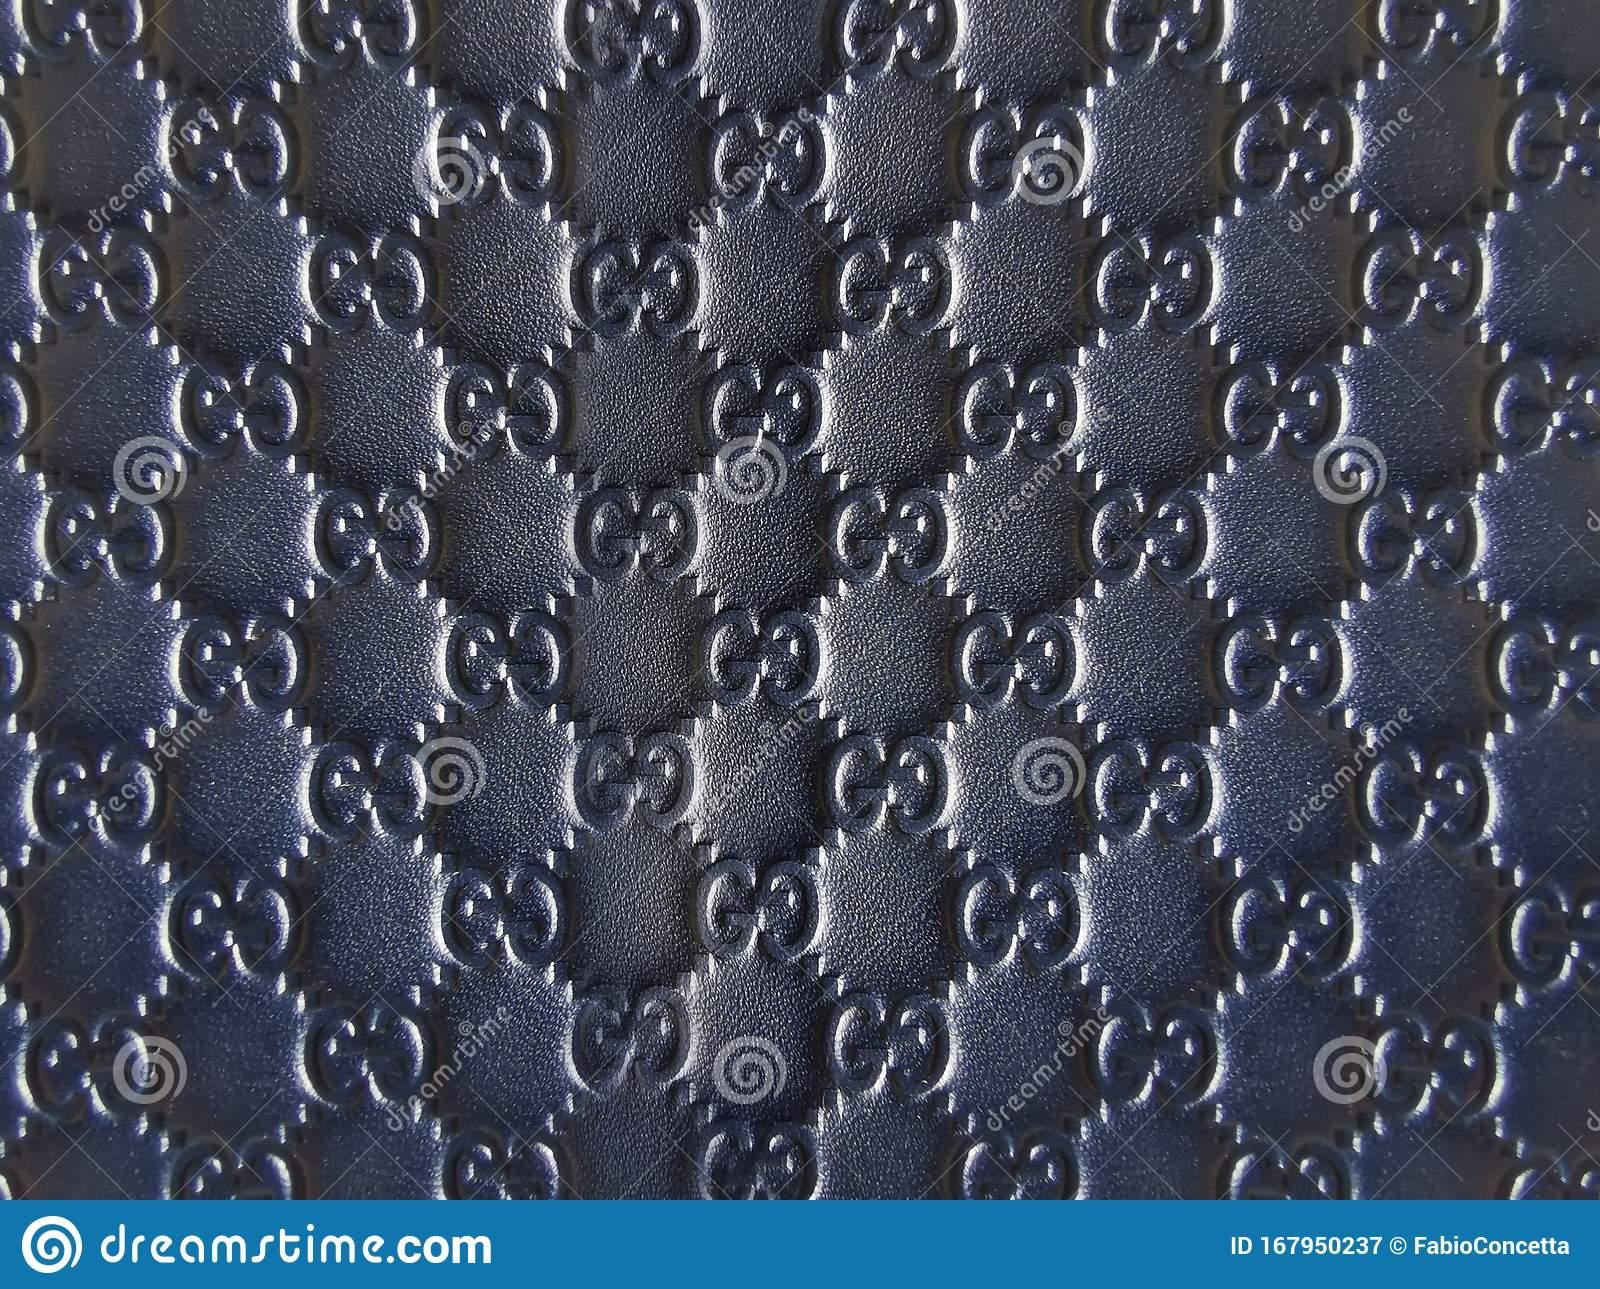 1600 x 1289 · jpeg - Blue Leather Background Of Gucci Monogram Logo Editorial Photography ...